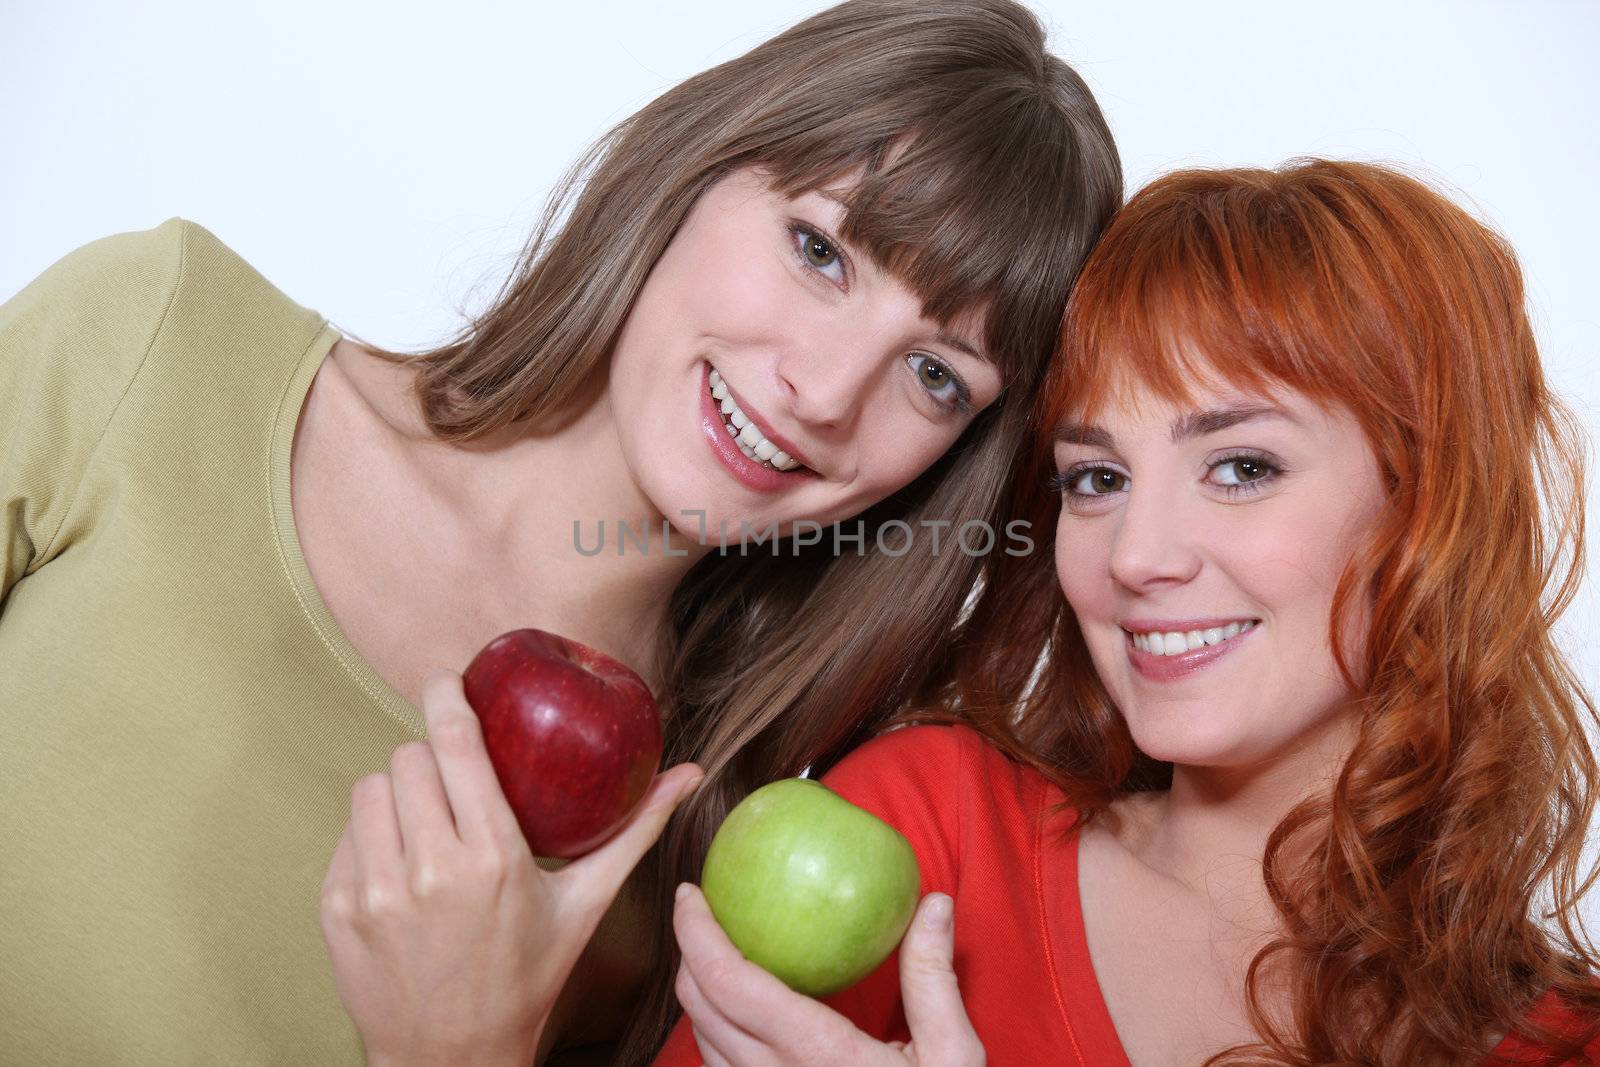 Women holding apples by phovoir